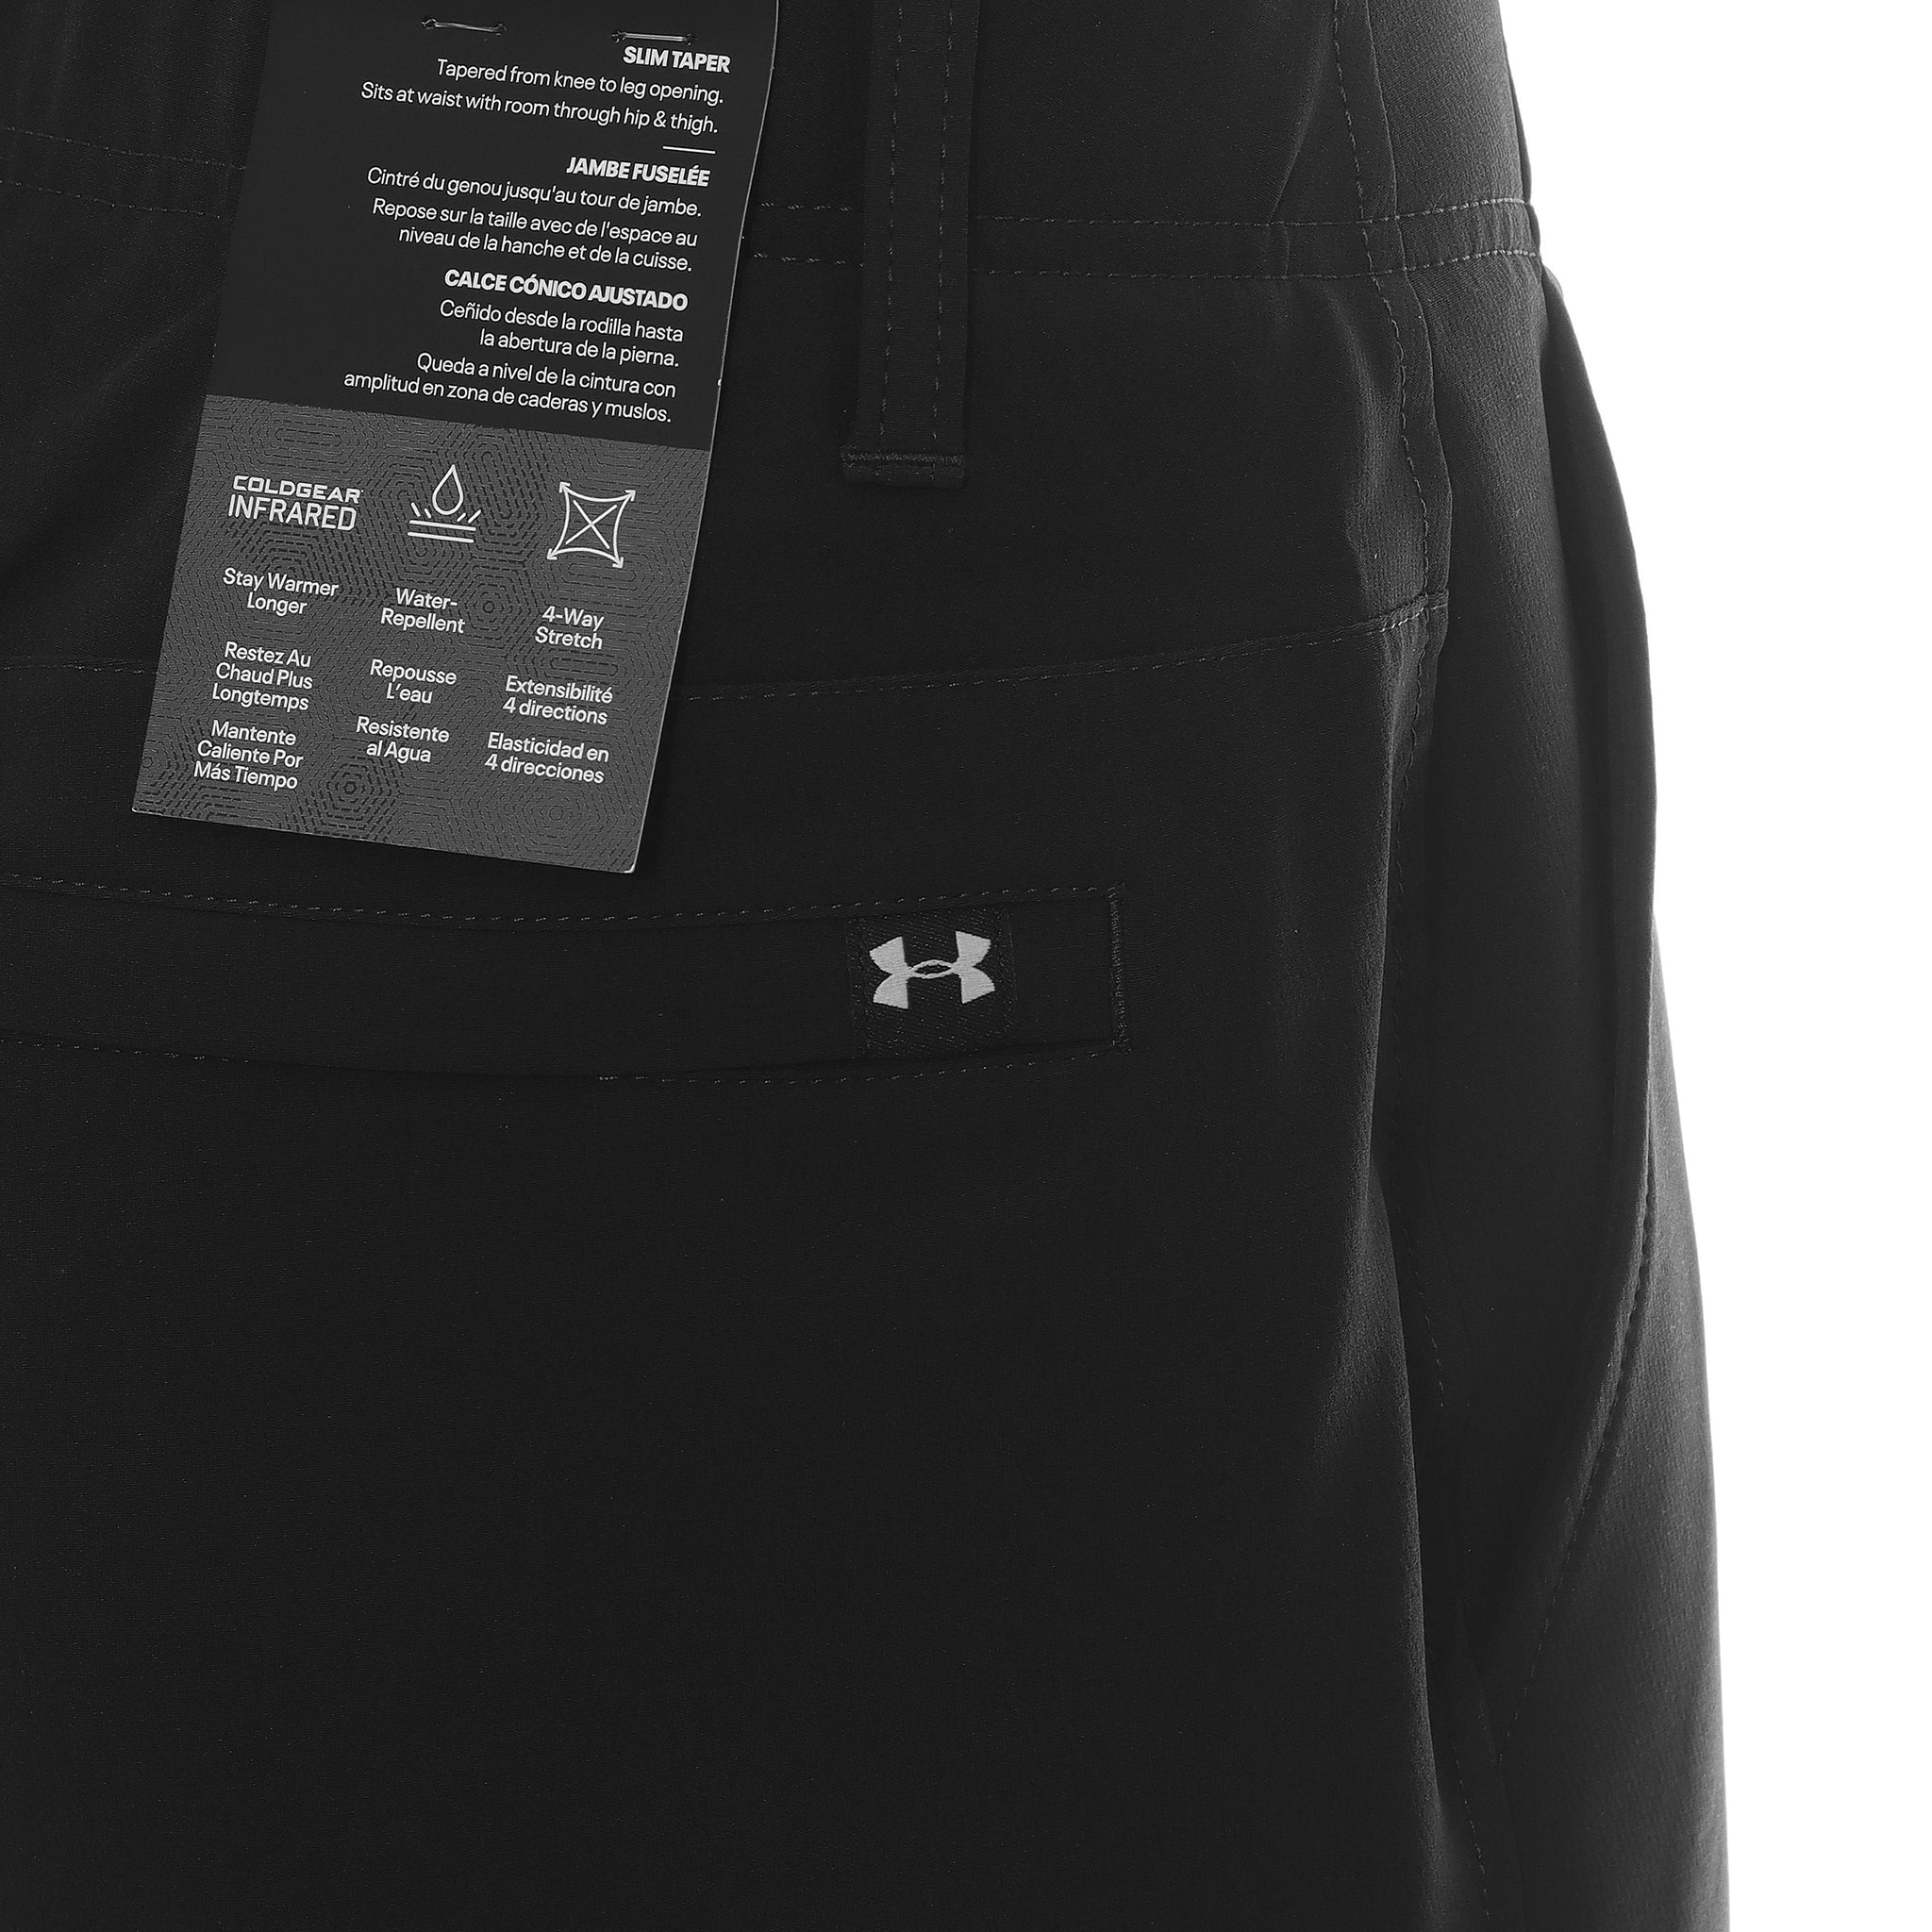 under-armour-golf-cgi-tapered-pants-1379729-black-001